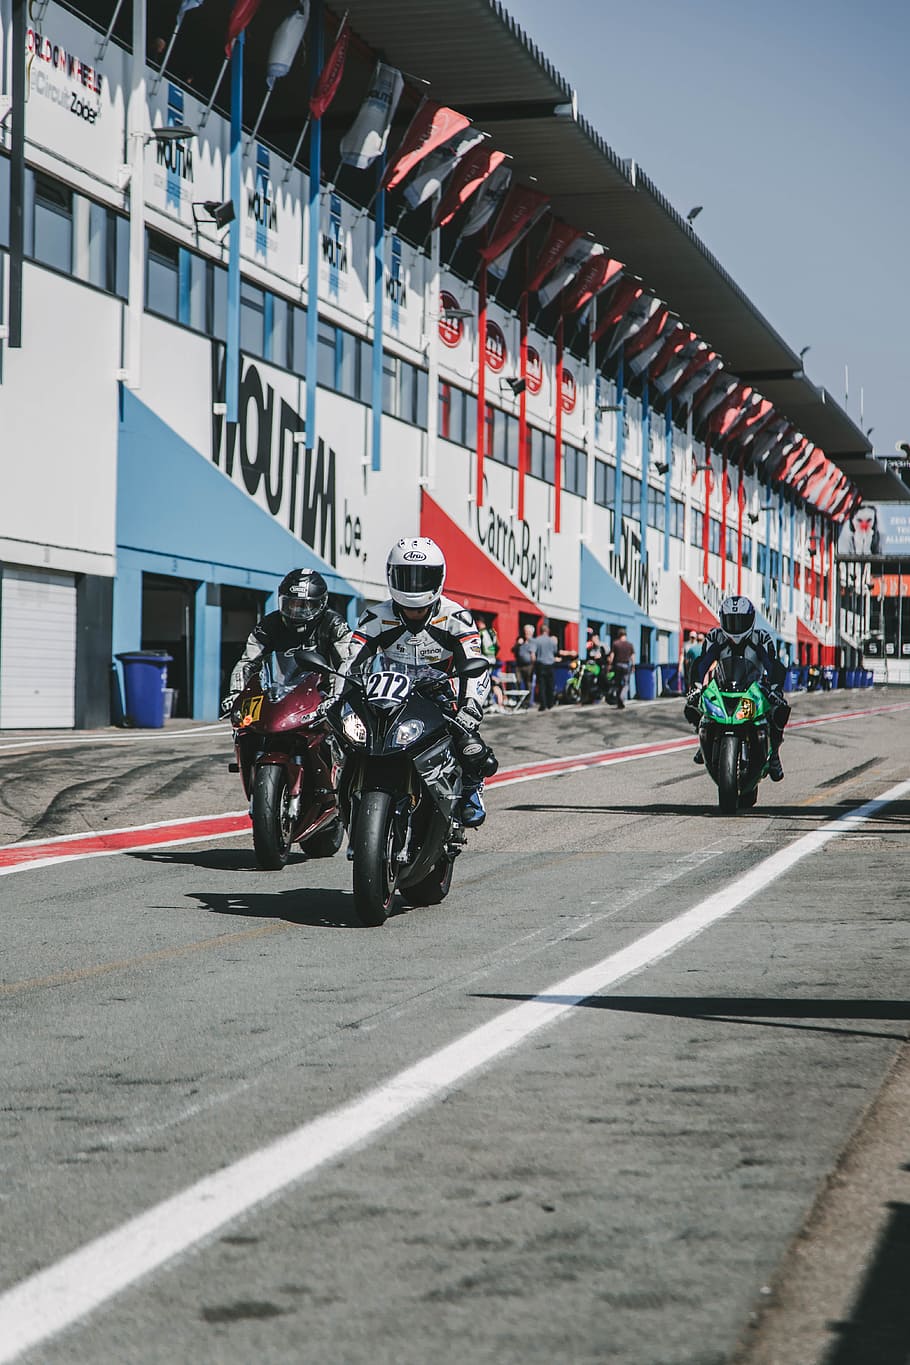 three race motorcycles with riders in the track, suit, helmet